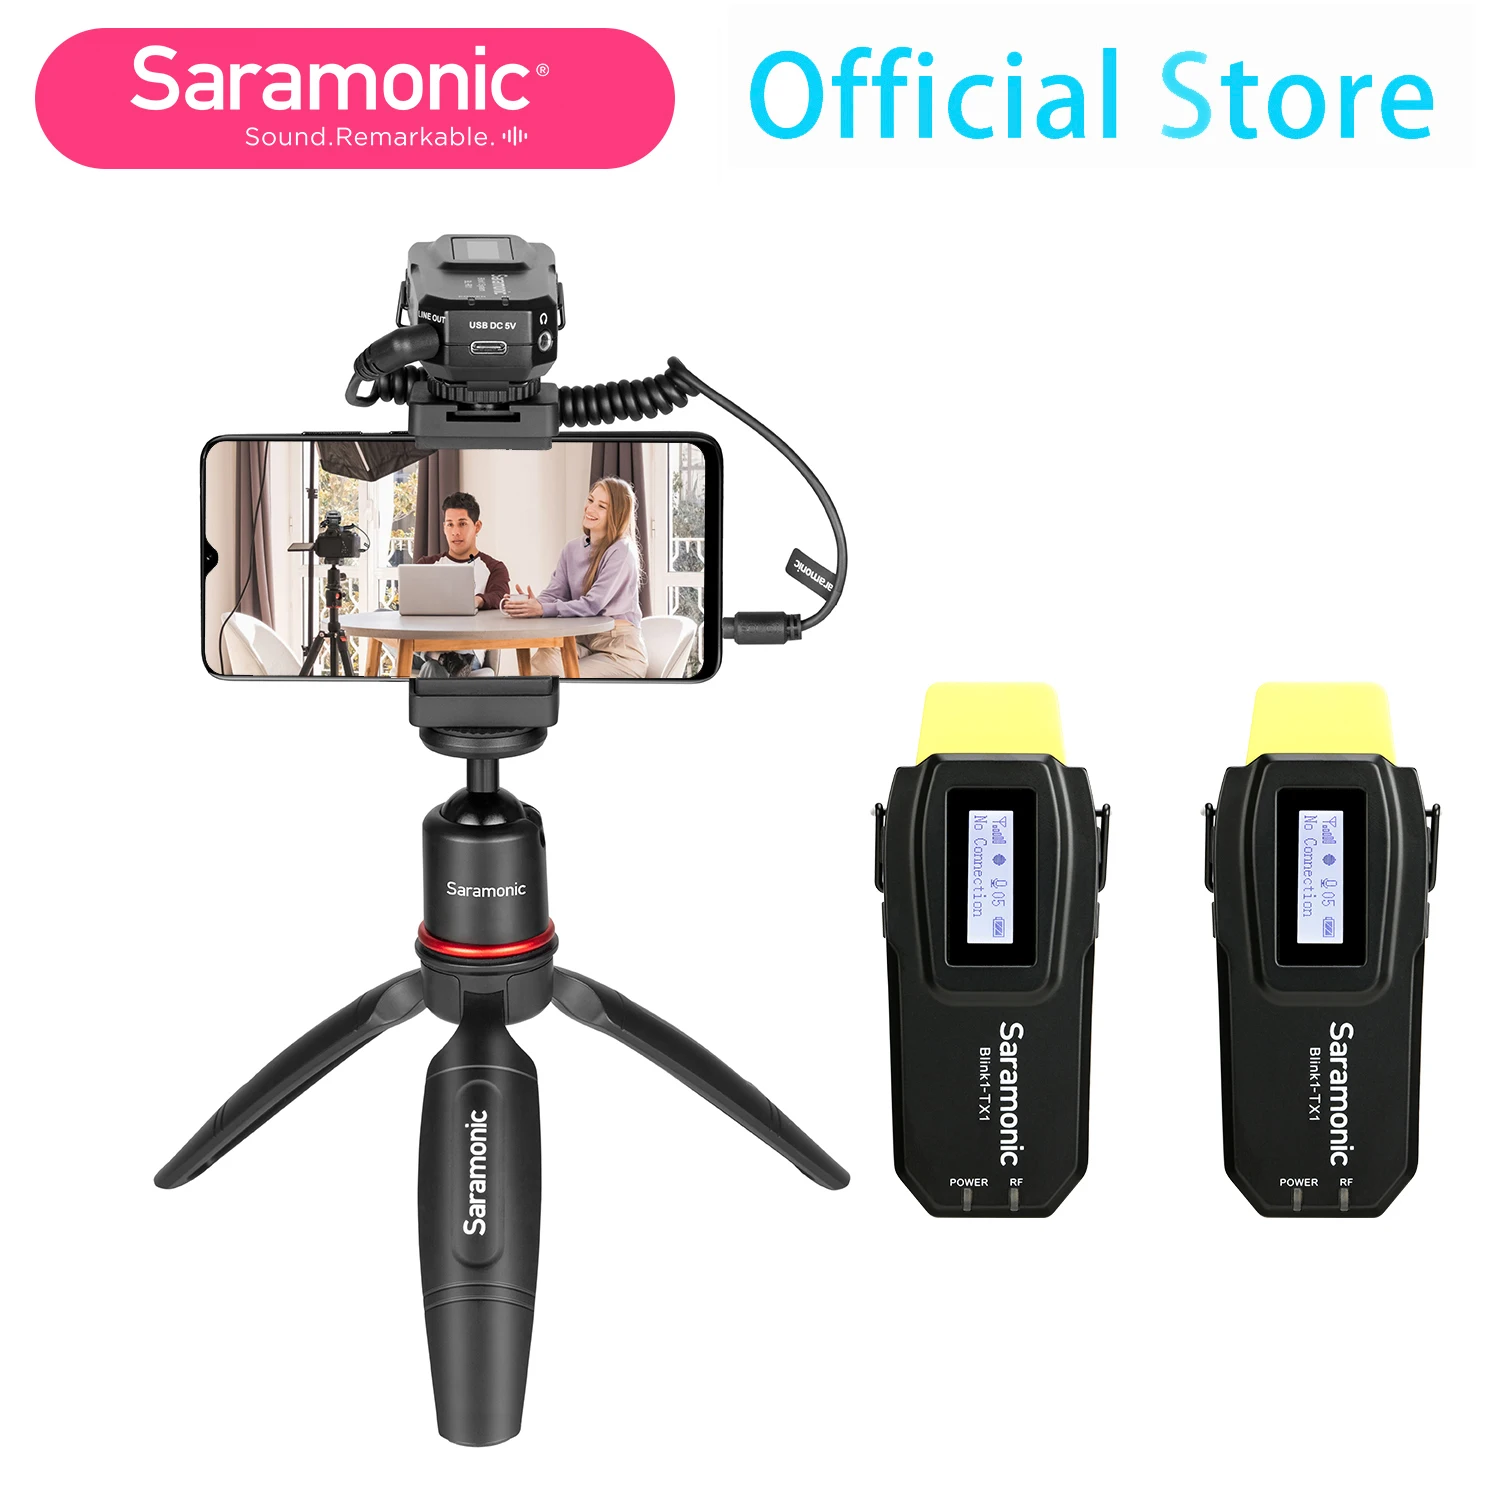 Saramonic Blink1 Kit2(TX+TX+RX) TDMA Wireless Microphone System Broadcast-quality Sound for Filmmaking Mobile Journalism&More